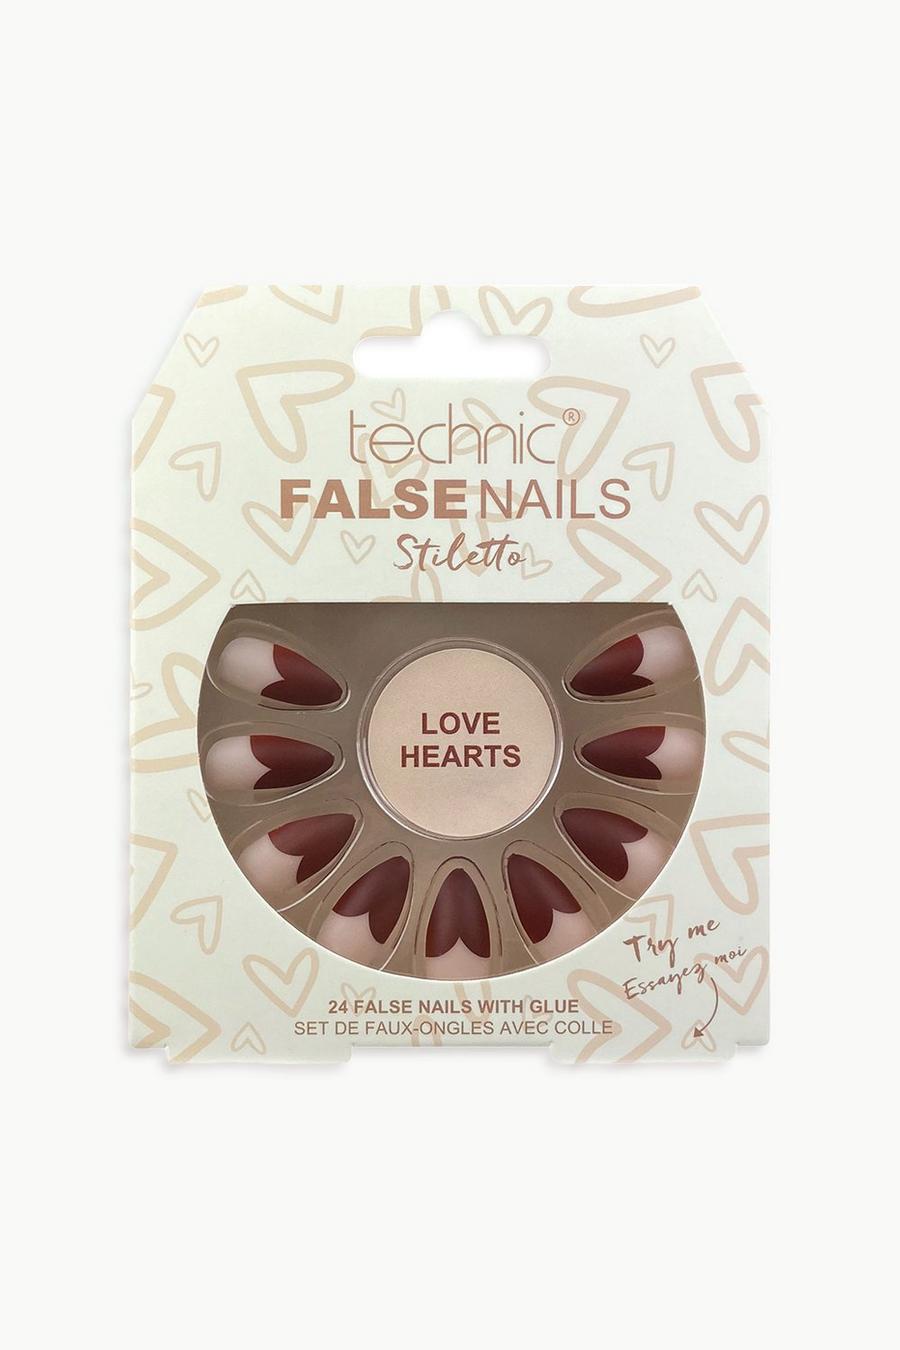 Technic - Faux ongles Stiletto - Love Hearts, Cream image number 1